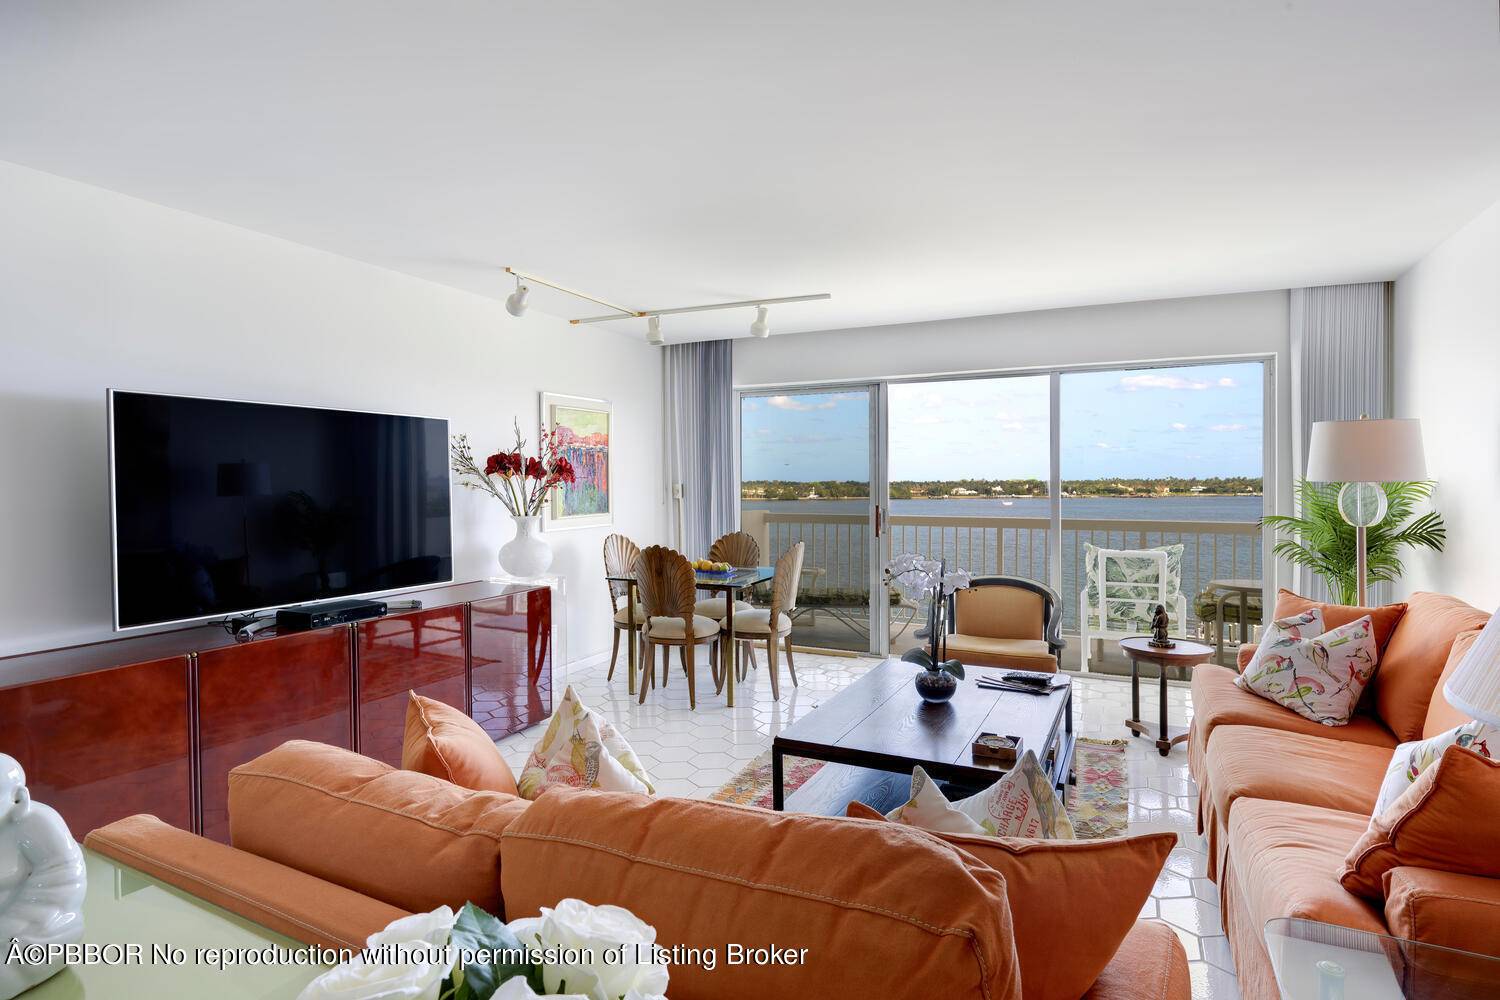 Outstanding unobstructed intracoastal views from all windows !